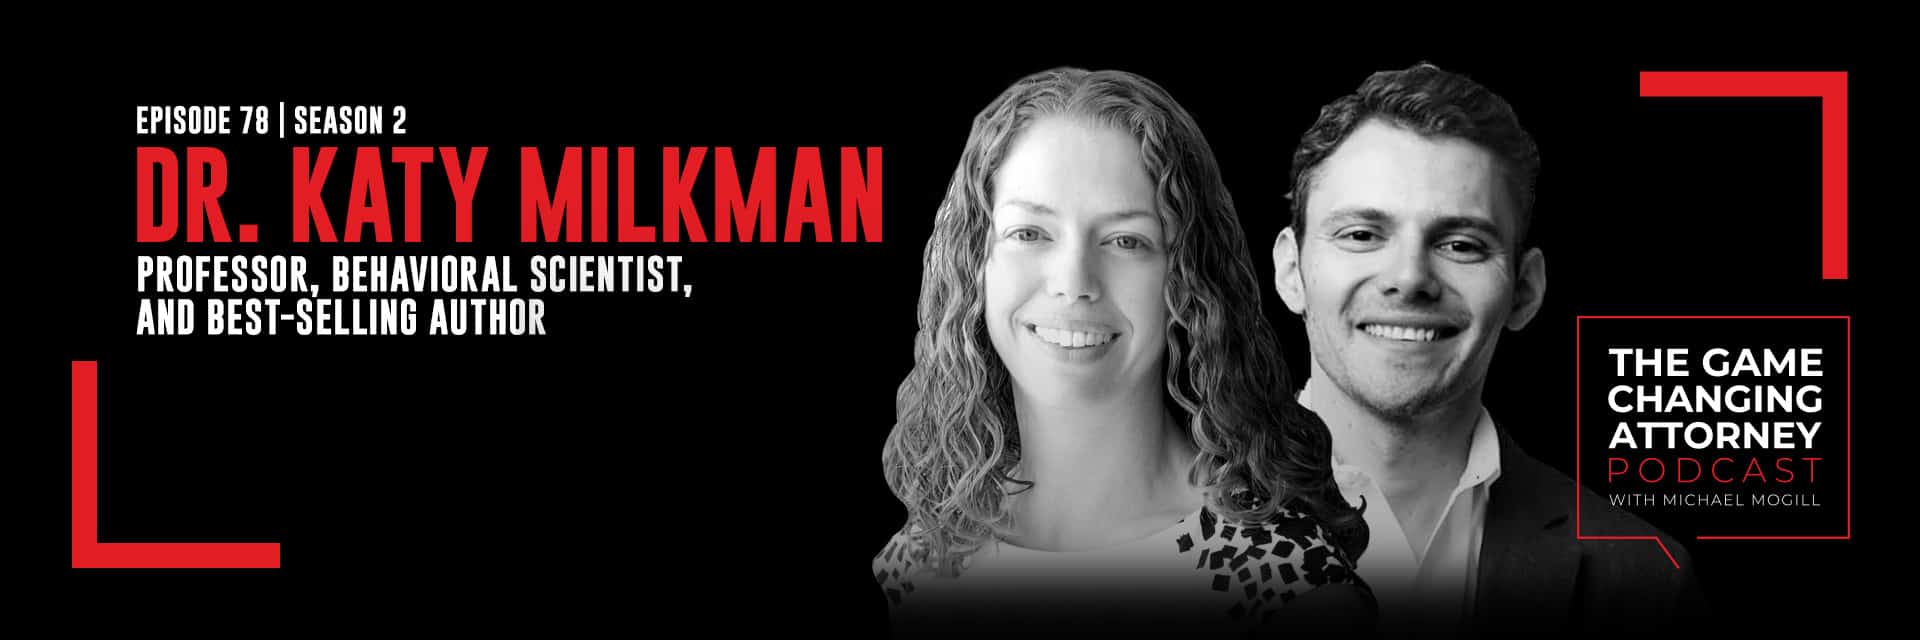 Dr. Katy Milkman - The Game Changing Attorney Podcast - Desktop